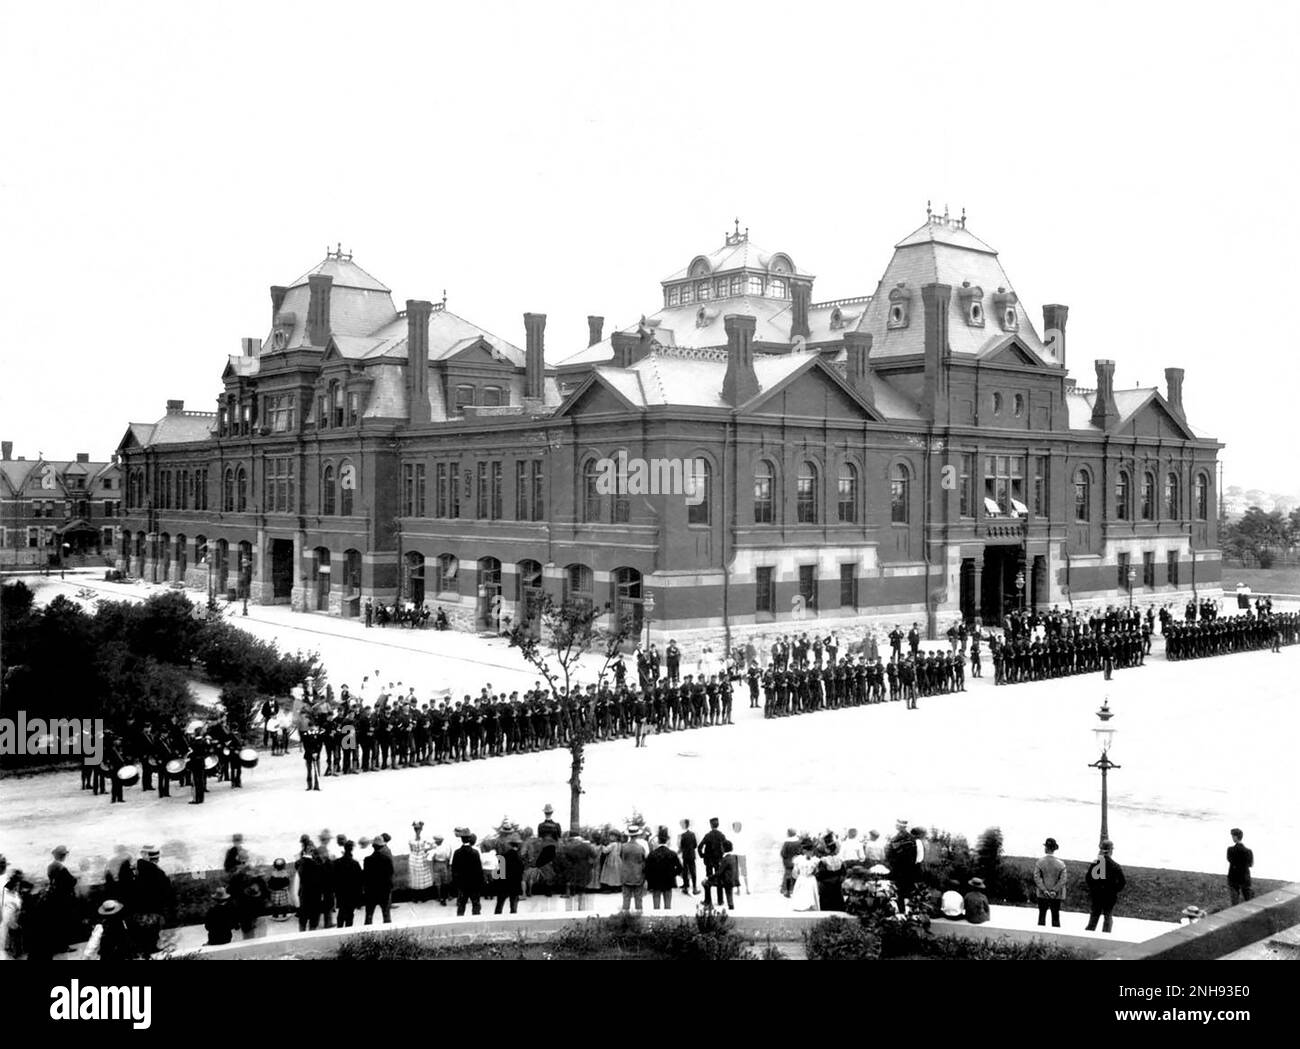 Striking railroad workers confronting Illinois National Guard troops in Chicago during the Pullman Strike, 1894. The Pullman Strike comprised two interrelated strikes in 1894, first by the American Railway Union (ARU) against the Pullman factory in Chicago, and then, when that failed, a national boycott against all trains that carried Pullman passenger cars, which lasted from May 11 to July 20 and was a turning point for US labor law./n/n Stock Photo